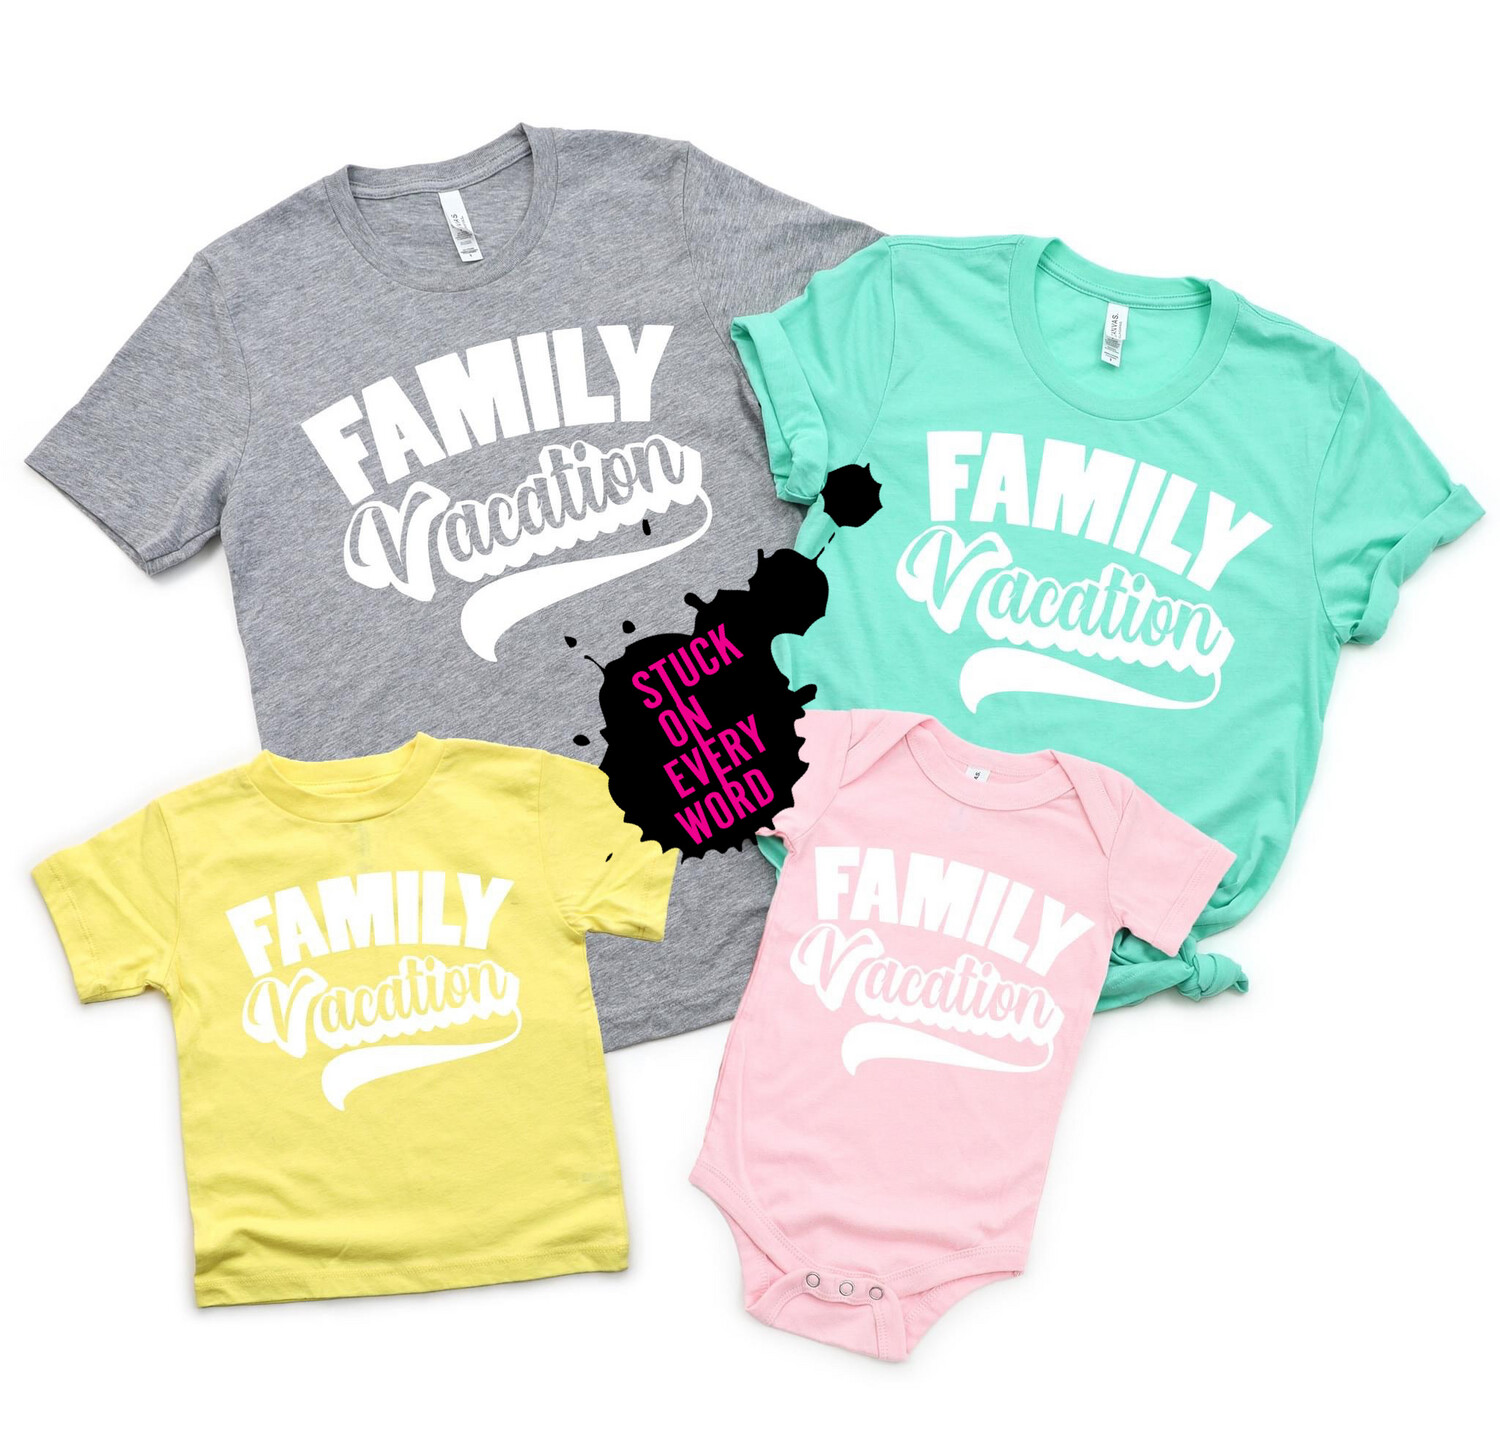 Family Vacation (White)